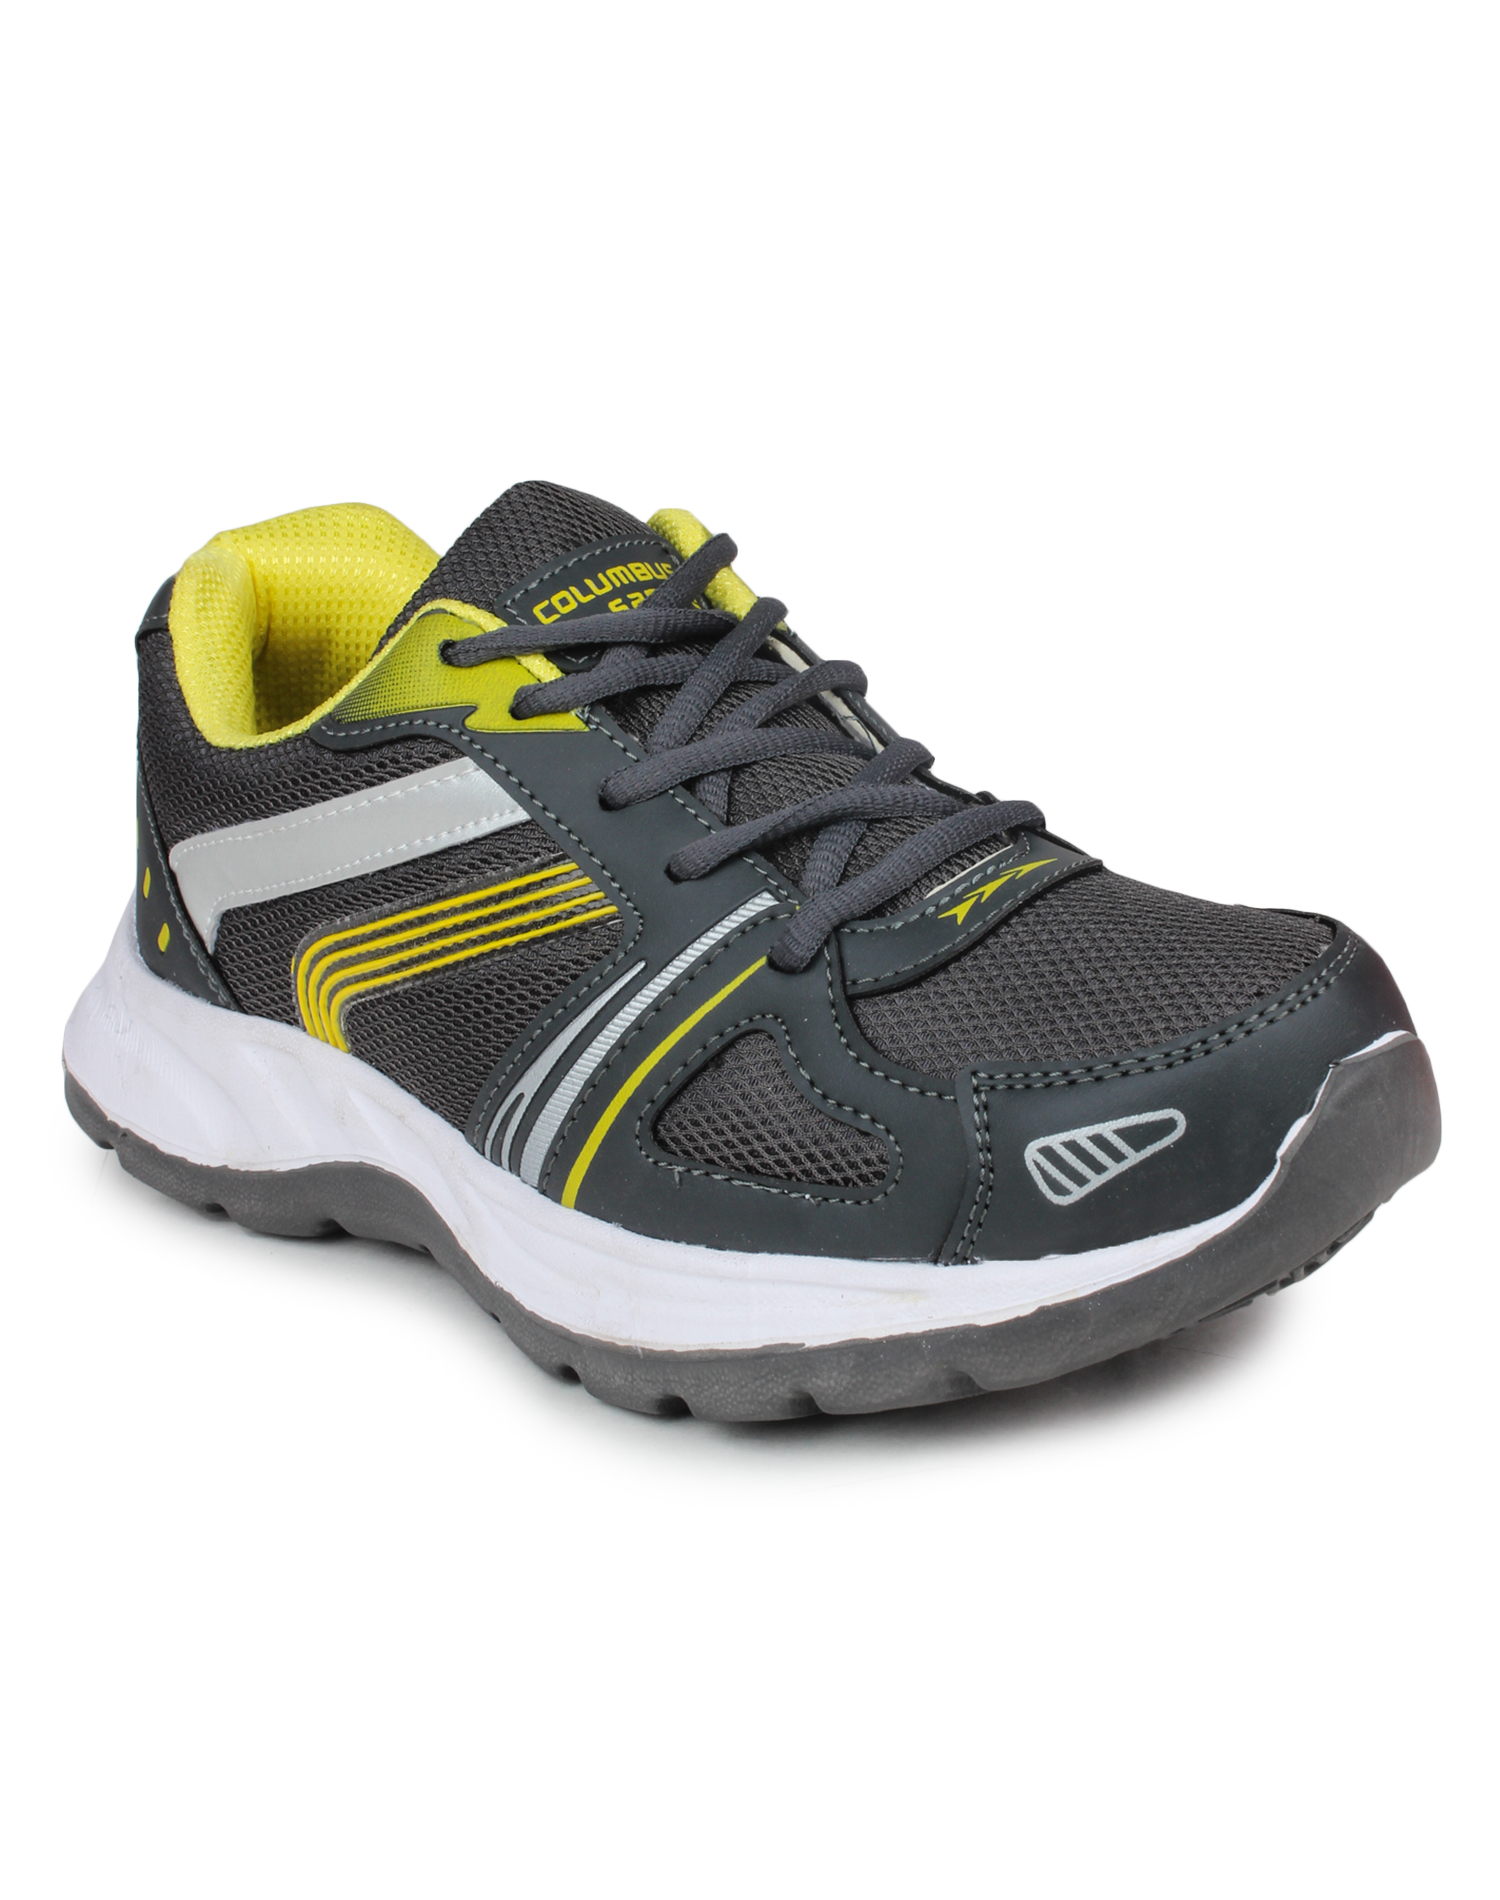 Buy Columbus Men's Yellow & Gray Running Shoes Online @ ₹499 from ShopClues